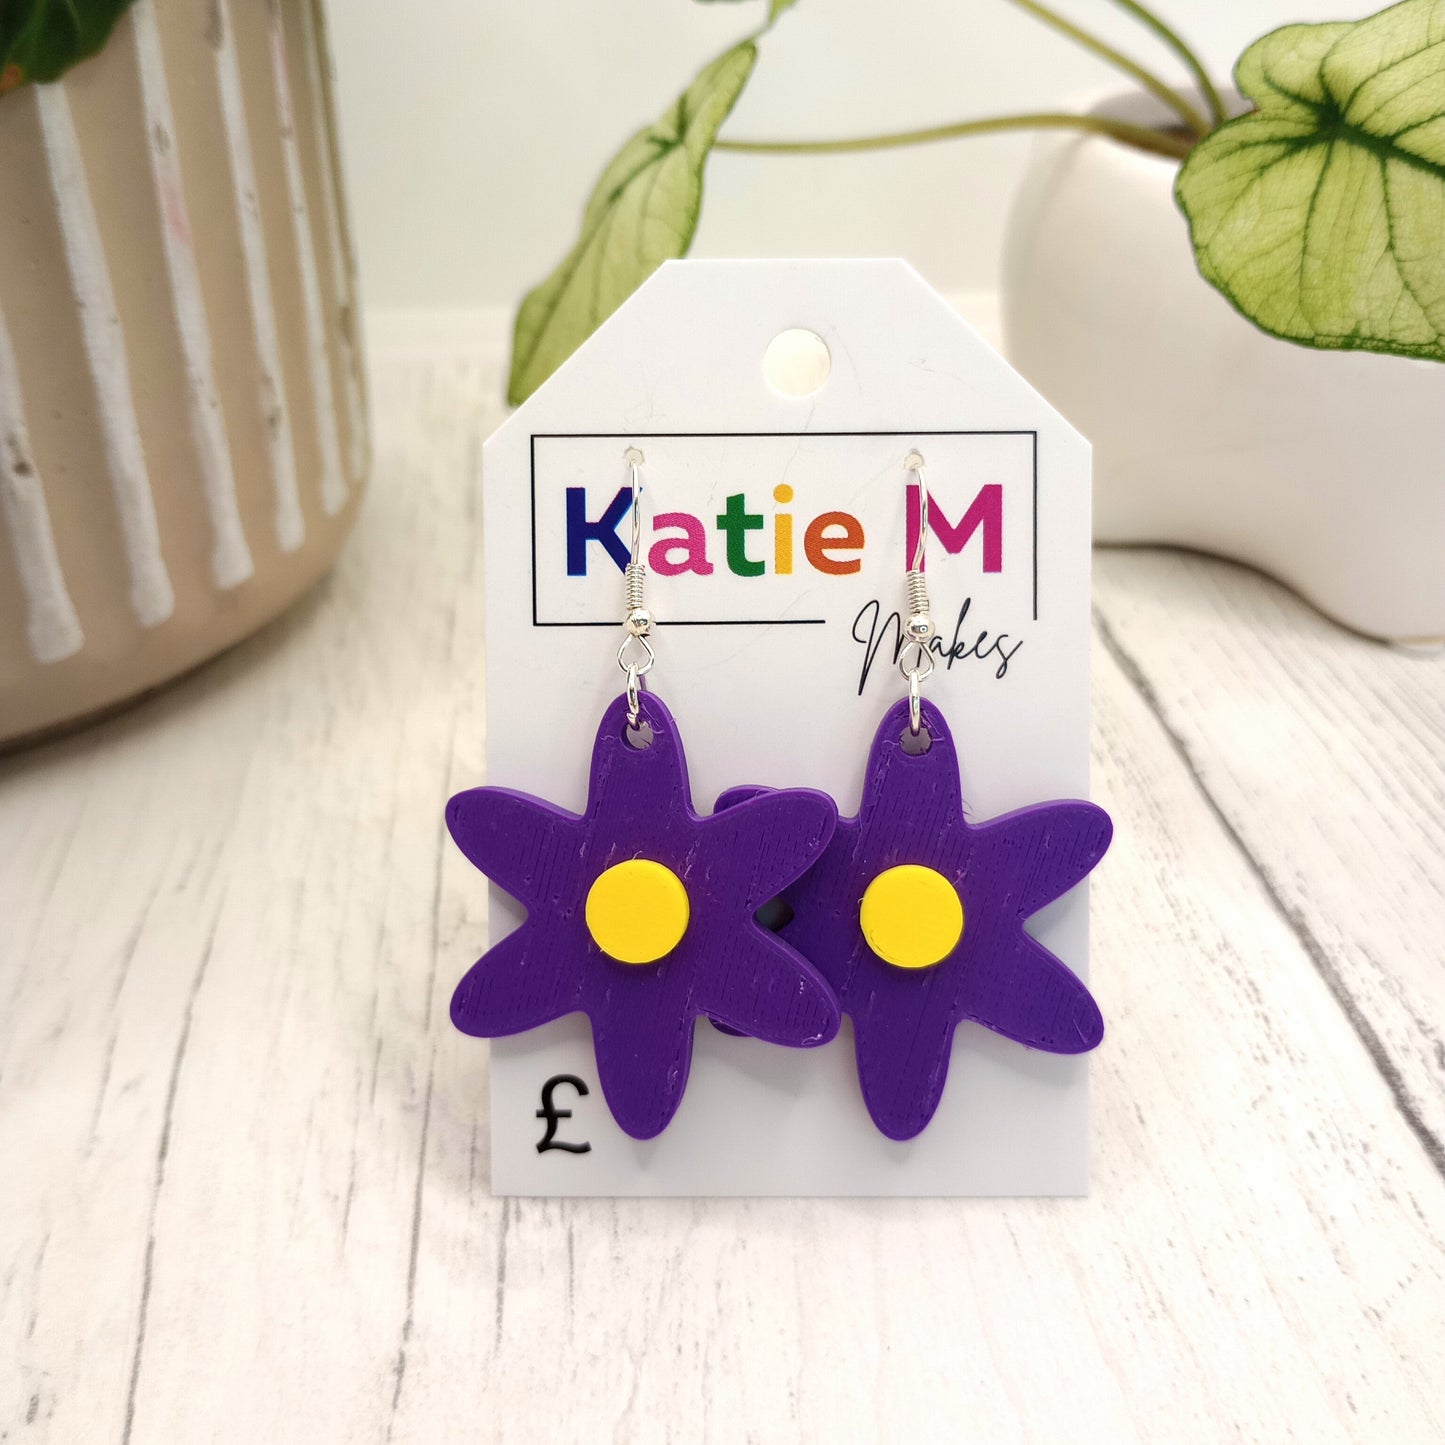 3D Printed Daisy Earrings - various colours available